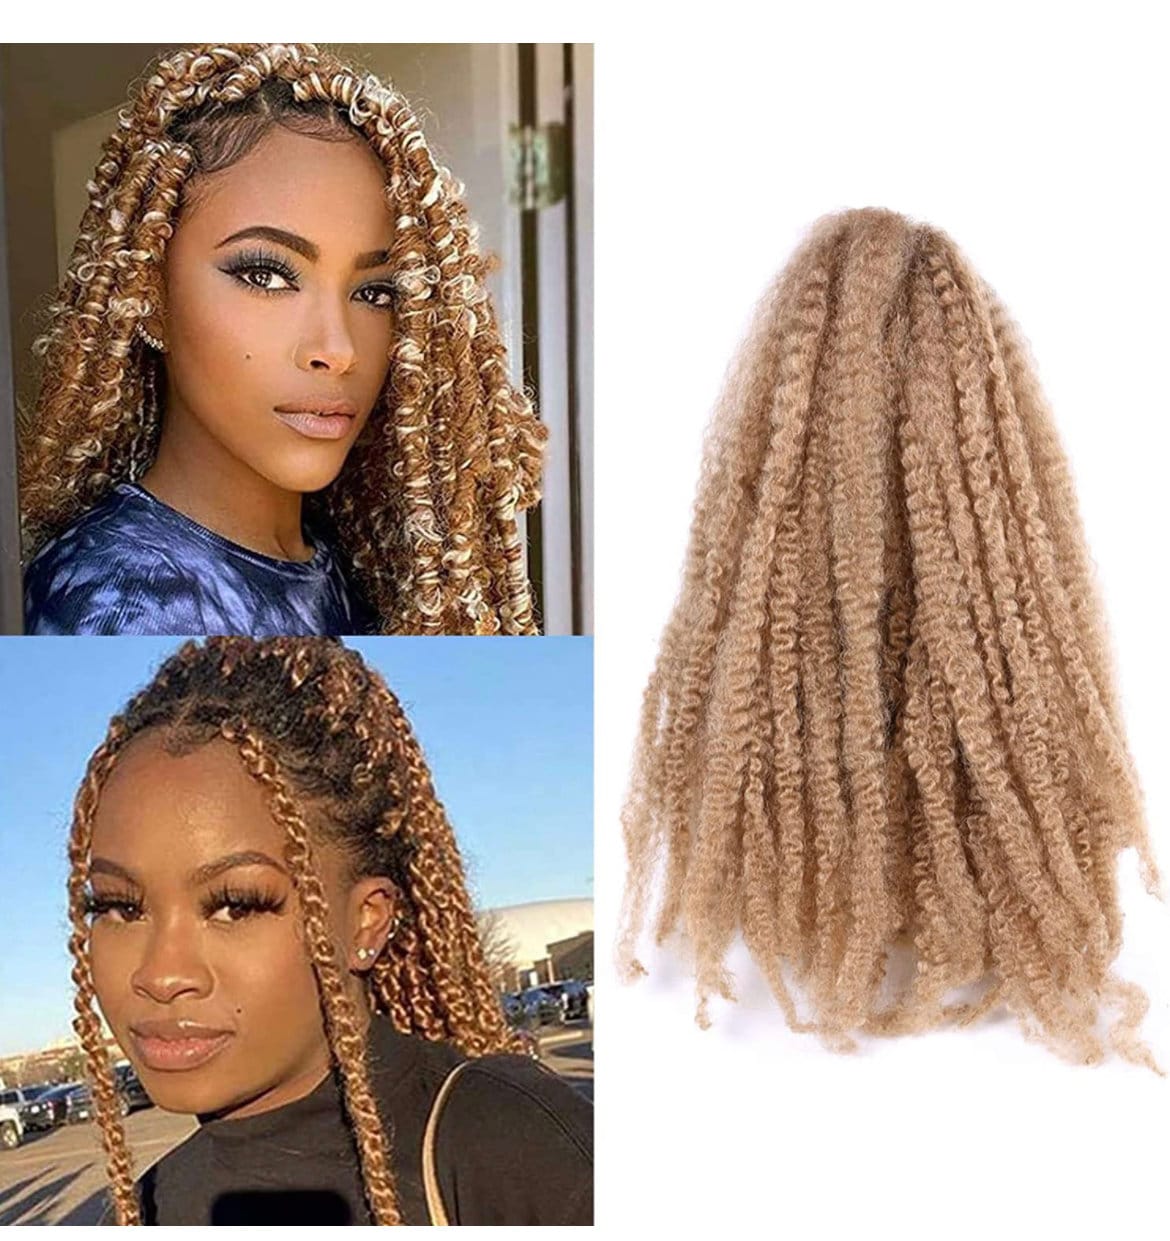 MORICA Passion Twist Hair 8 Packs 14 Inch Passion Twist Crochet Hair For  Women, Crochet Pretwisted Curly Hair Passion Twists Synthetic Braiding Hair  Extensions (14 Inch, 1B) 